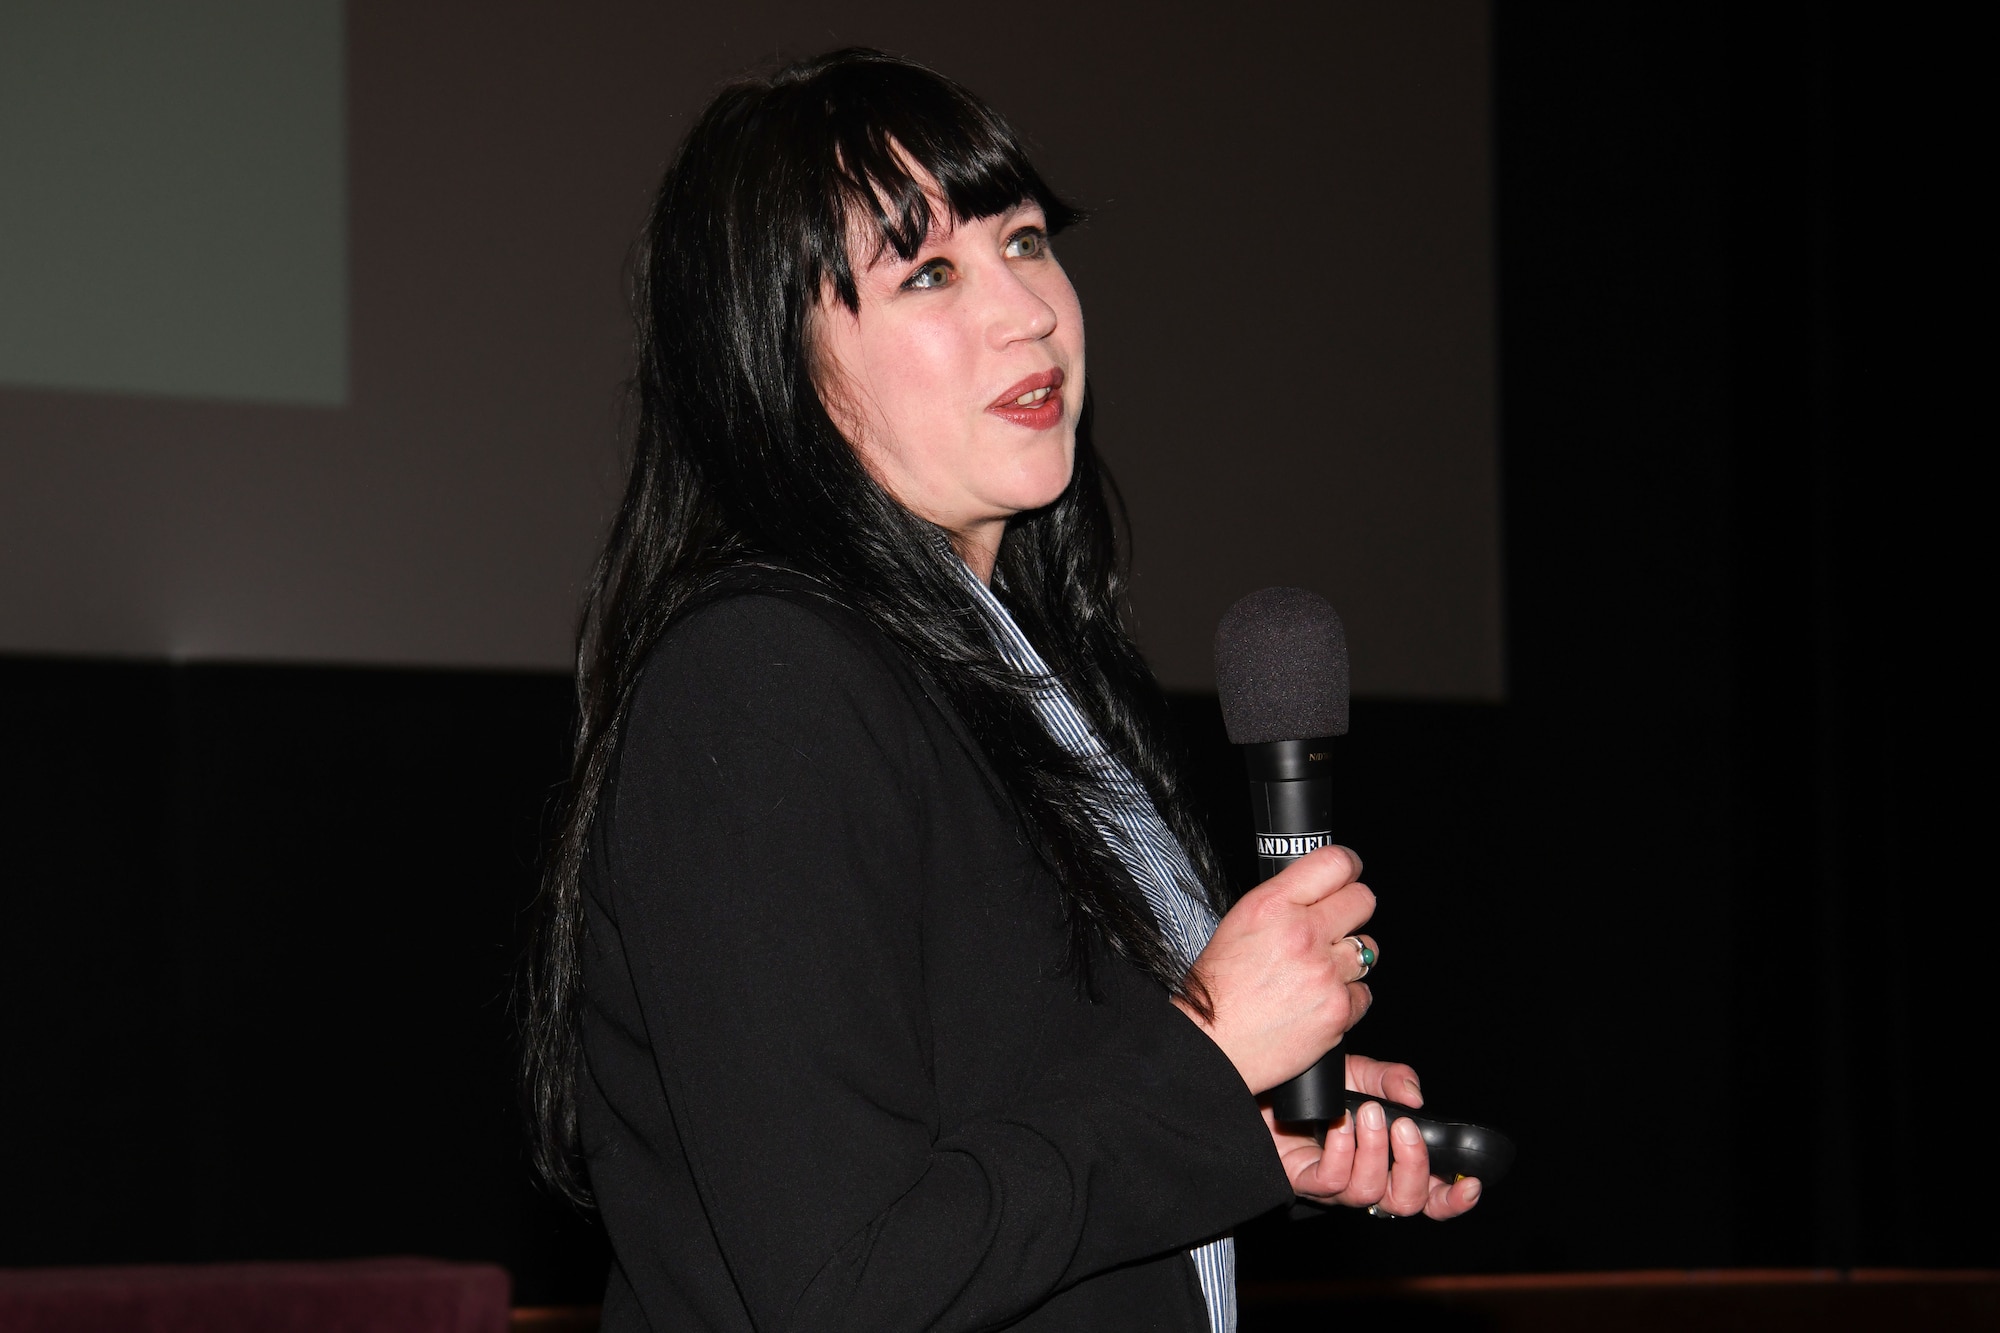 Anna Nasset, a stalking survivor, speaks about her experience at the base theater on F. E. Warren Air Force Base, Wyoming, April 14, 2022. She spoke to spread awareness on the issue during Sexual Assault Awareness Month. (courtesy photo)